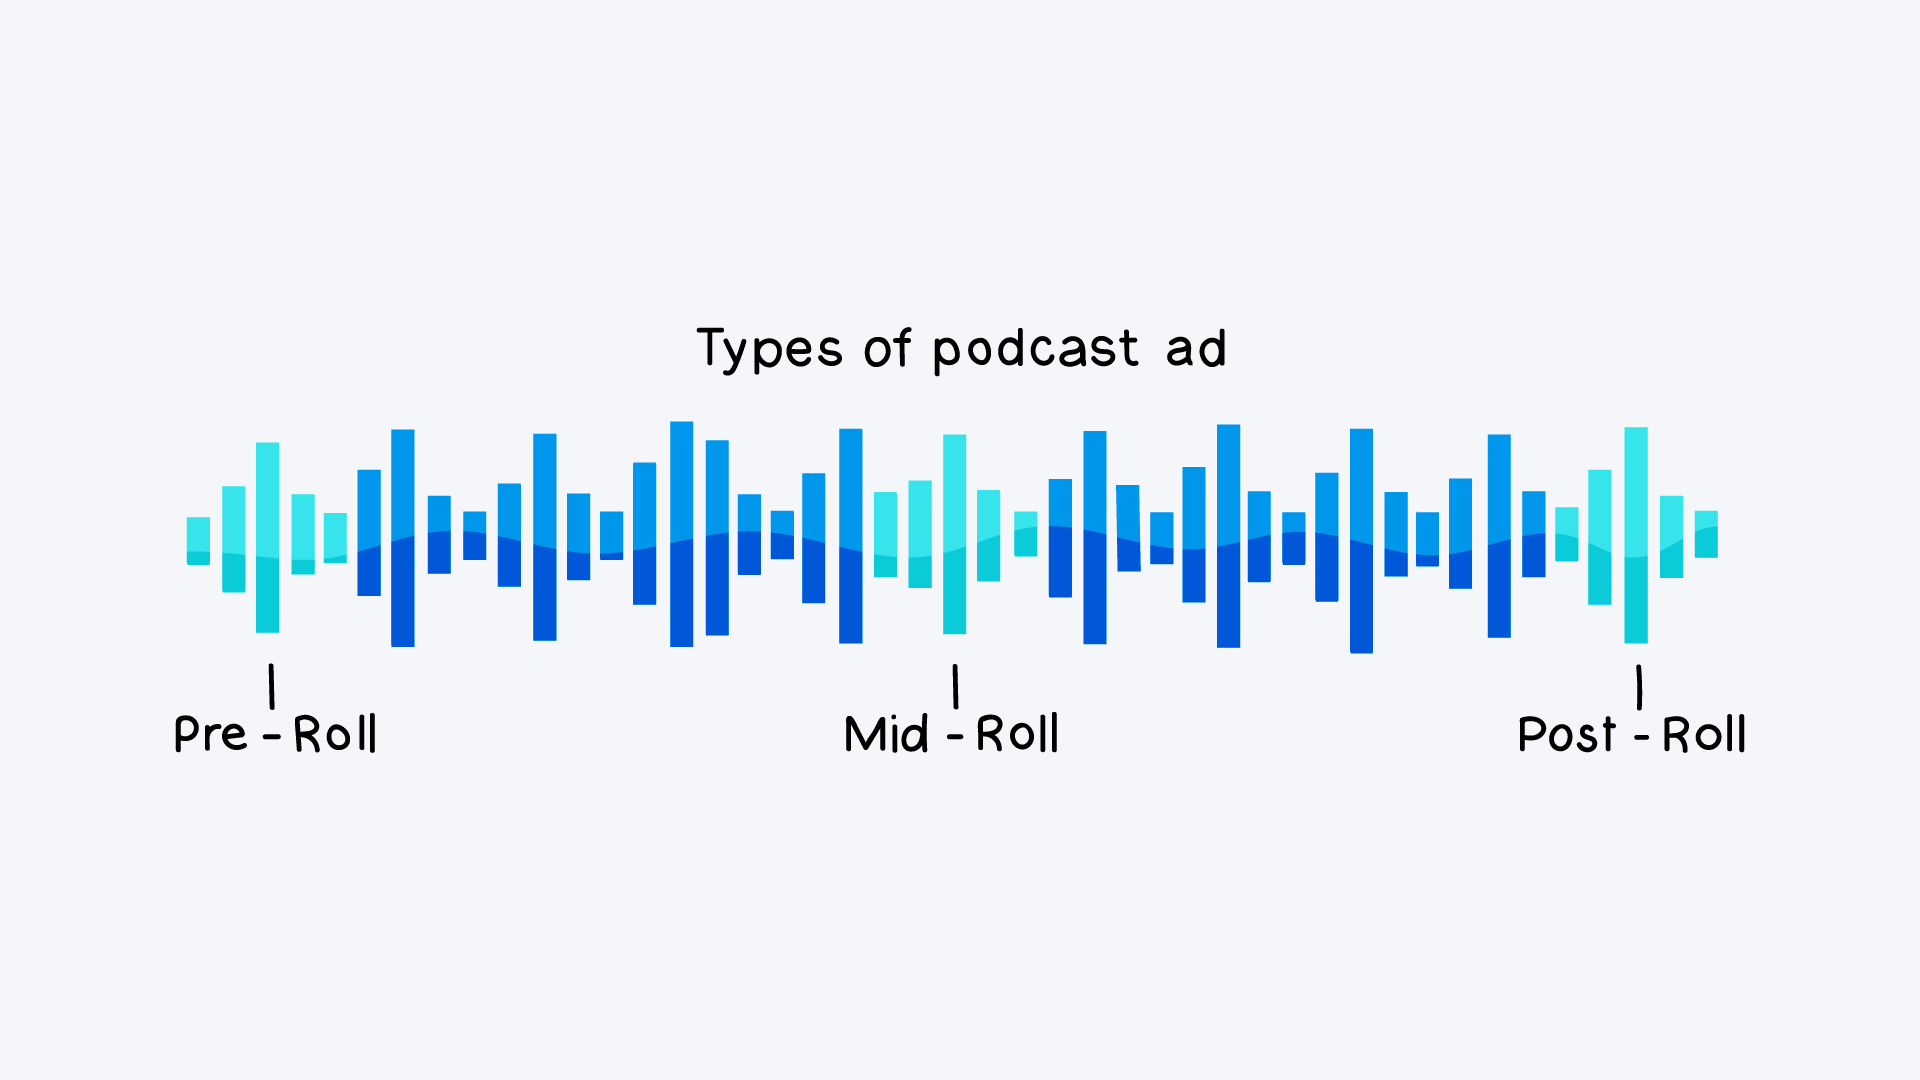 Pre-roll, mid-roll and post-roll podcast ads